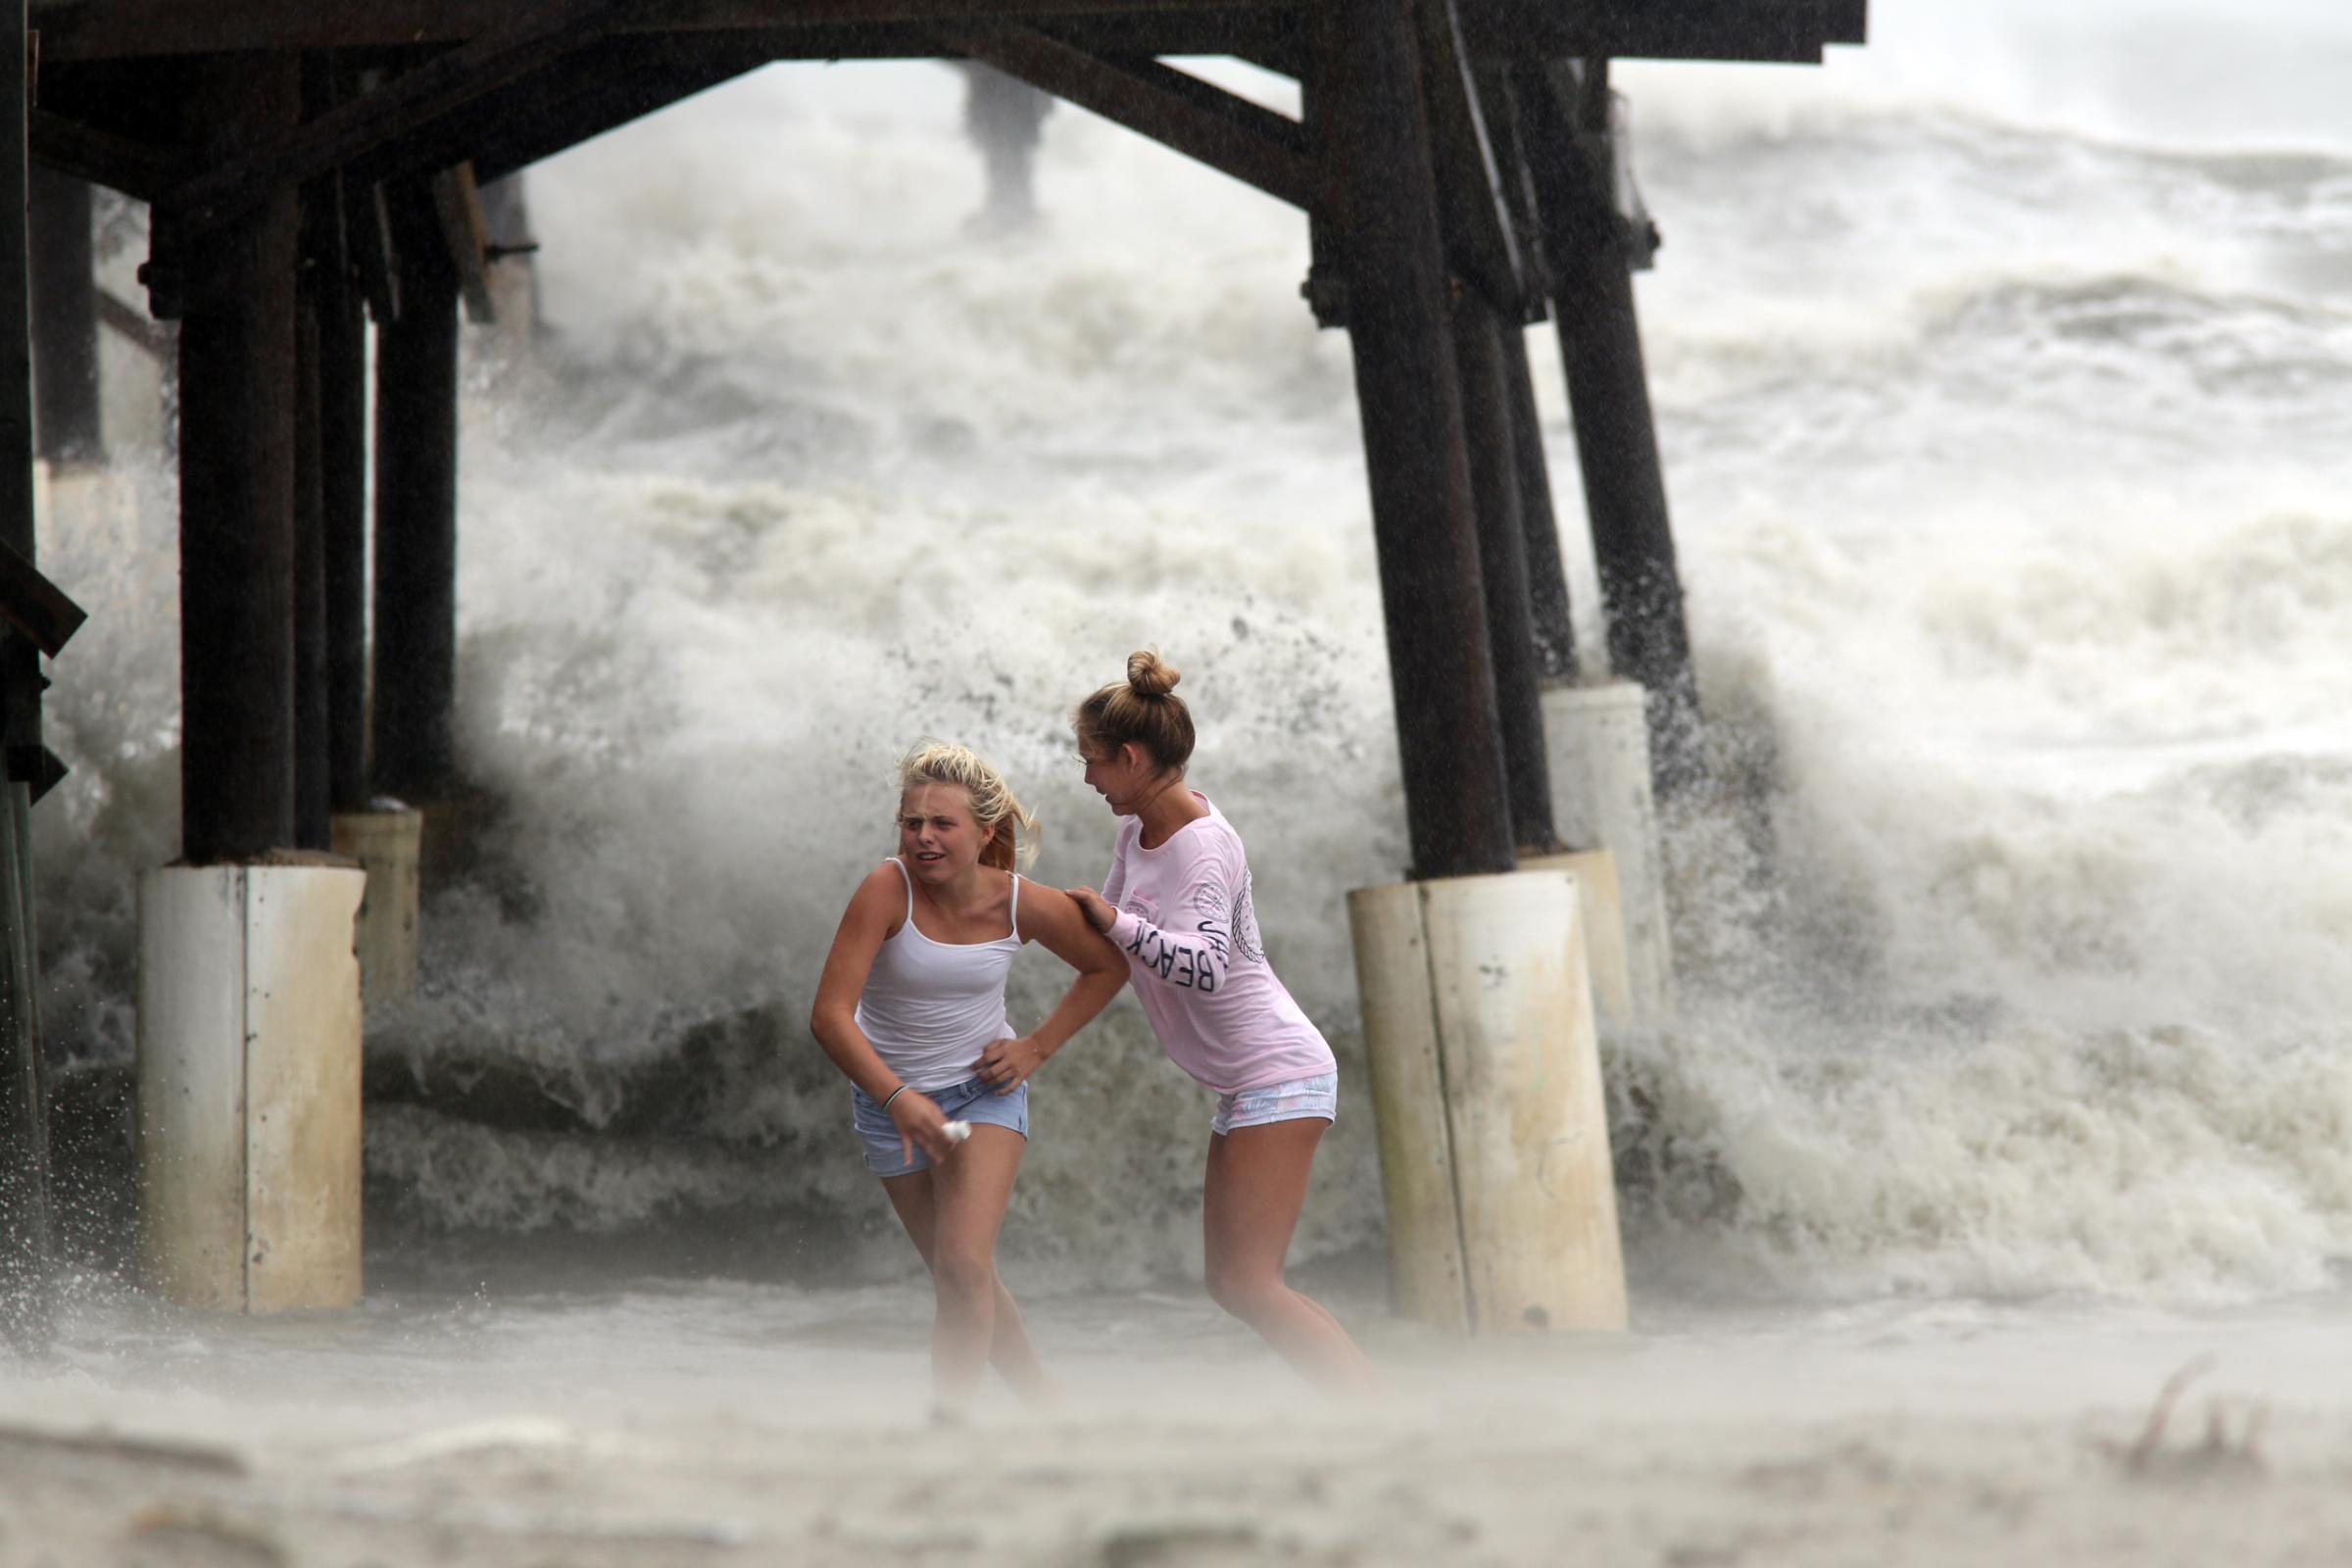 Kaleigh Black, 14, left, and Amber Olsen, 12, run for cover as a squall with rain and wind from the remnants of Hurricane Matthew pelt them as they explore the Cocoa Beach Pier on Friday, Oct. 7, 2016, in Cocoa Beach, Fla. (Douglas R. Clifford/Tampa Bay Times via AP)